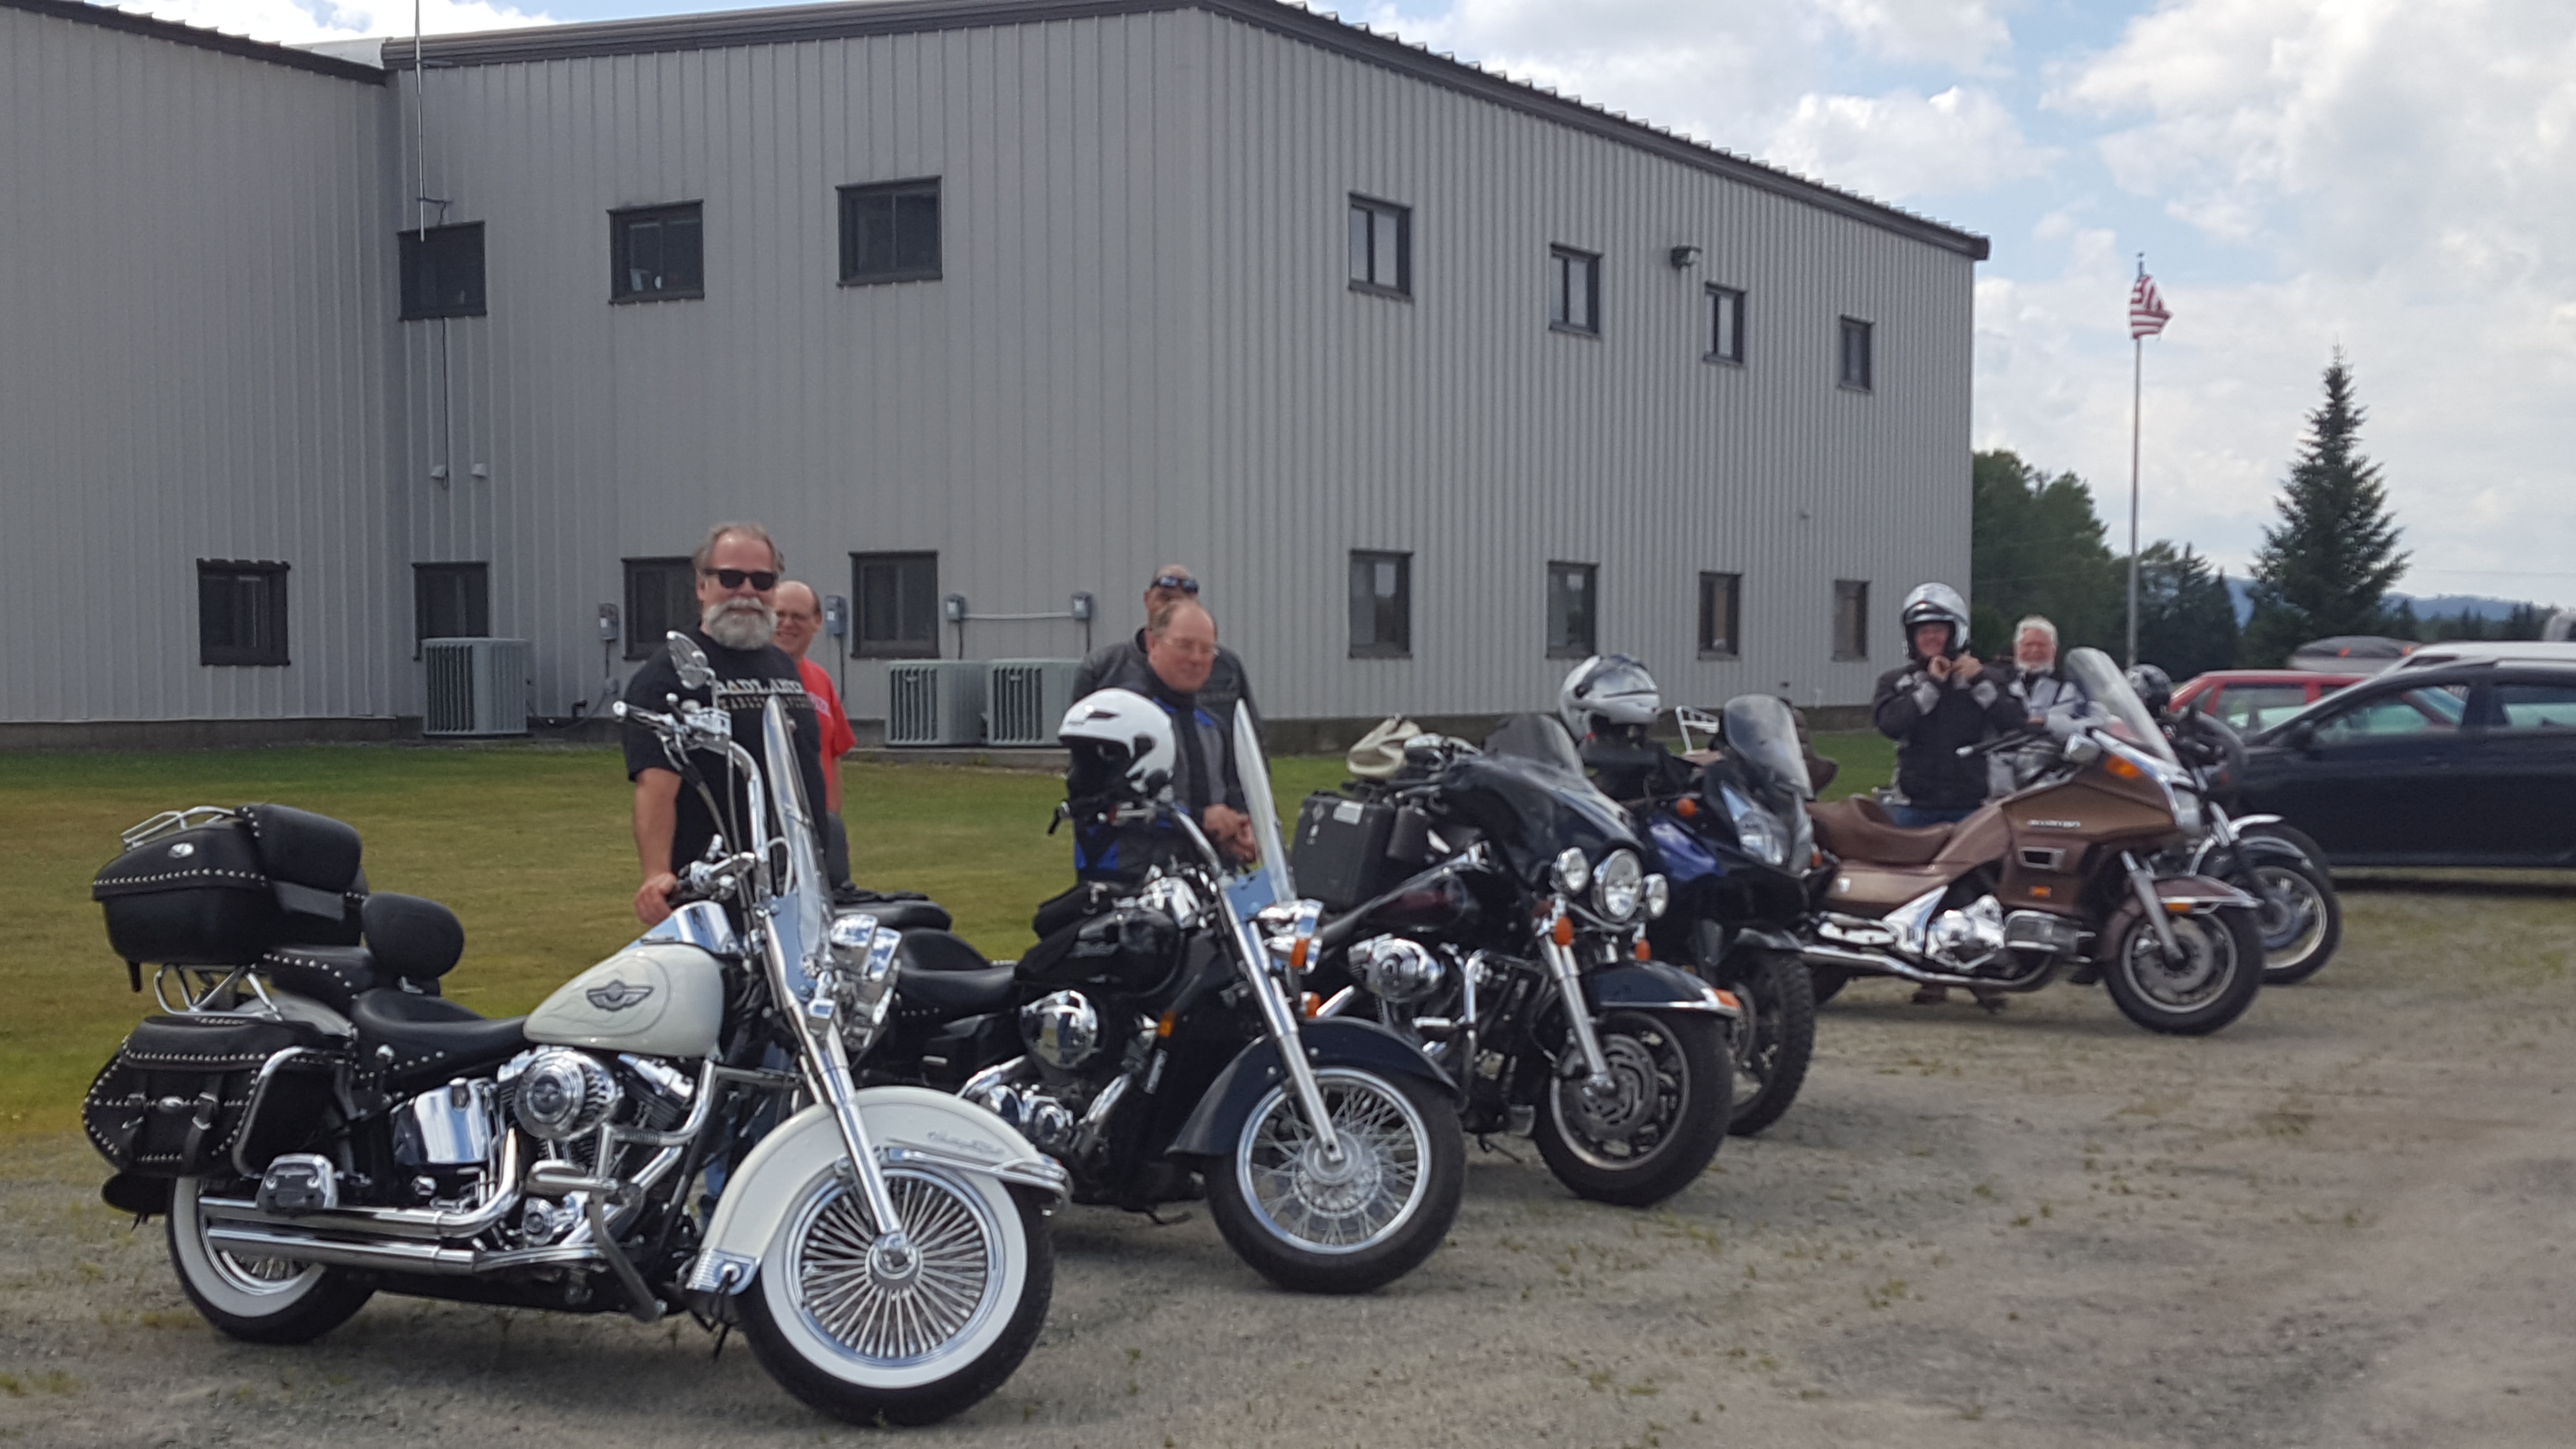 Motorcycle Ride Lunch & Learn – August 18th